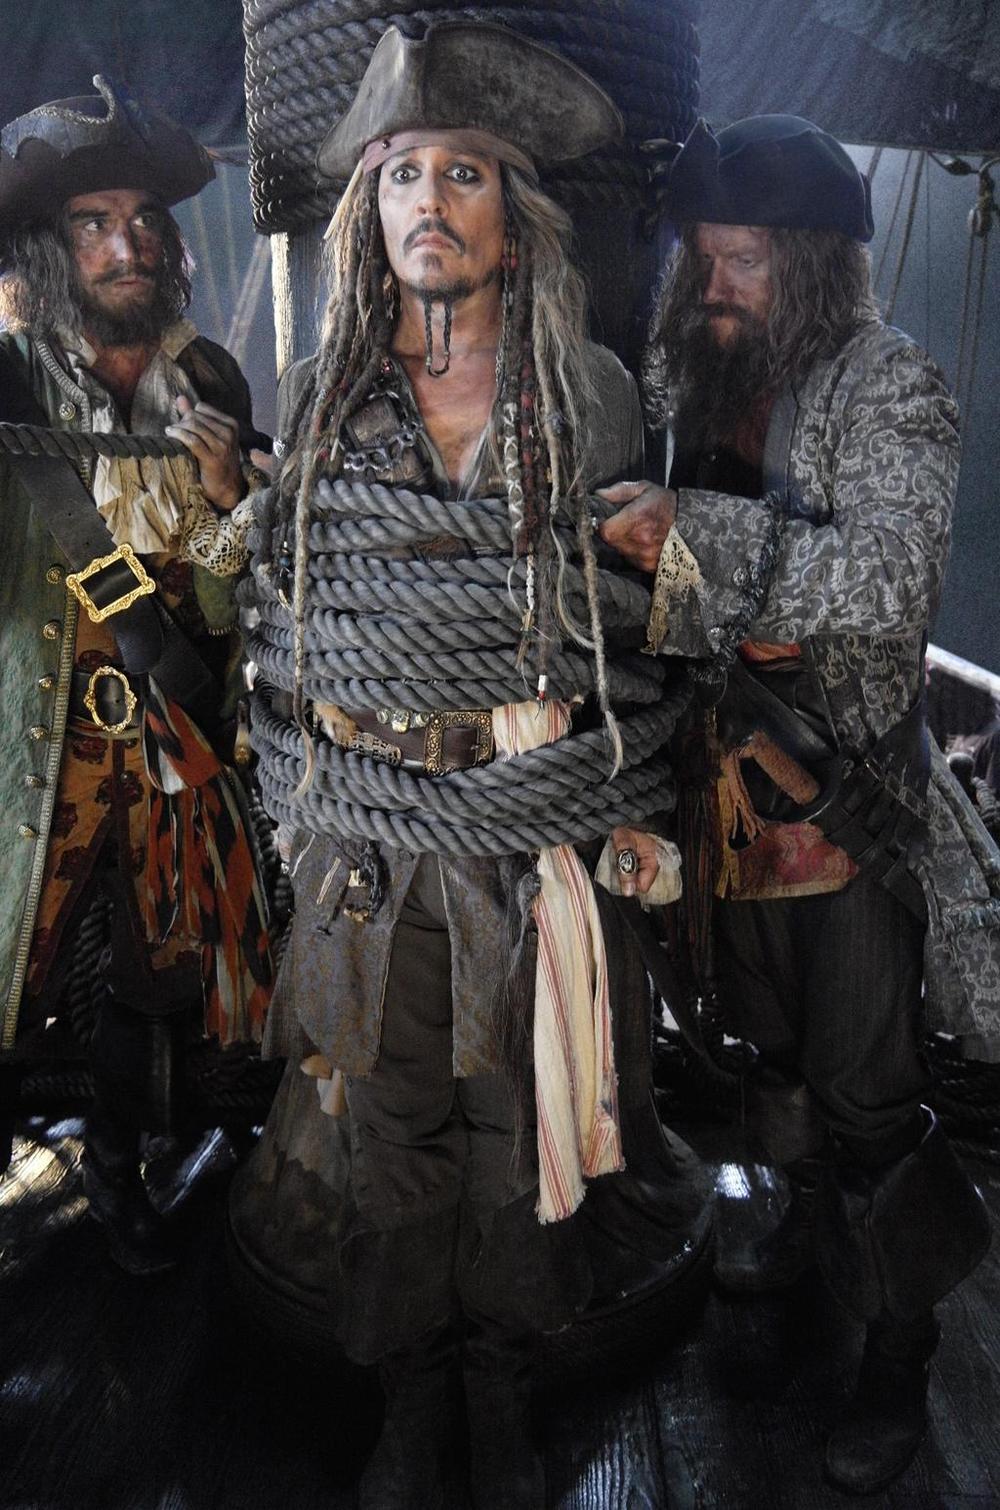 pirates-of-the-caribbean-5